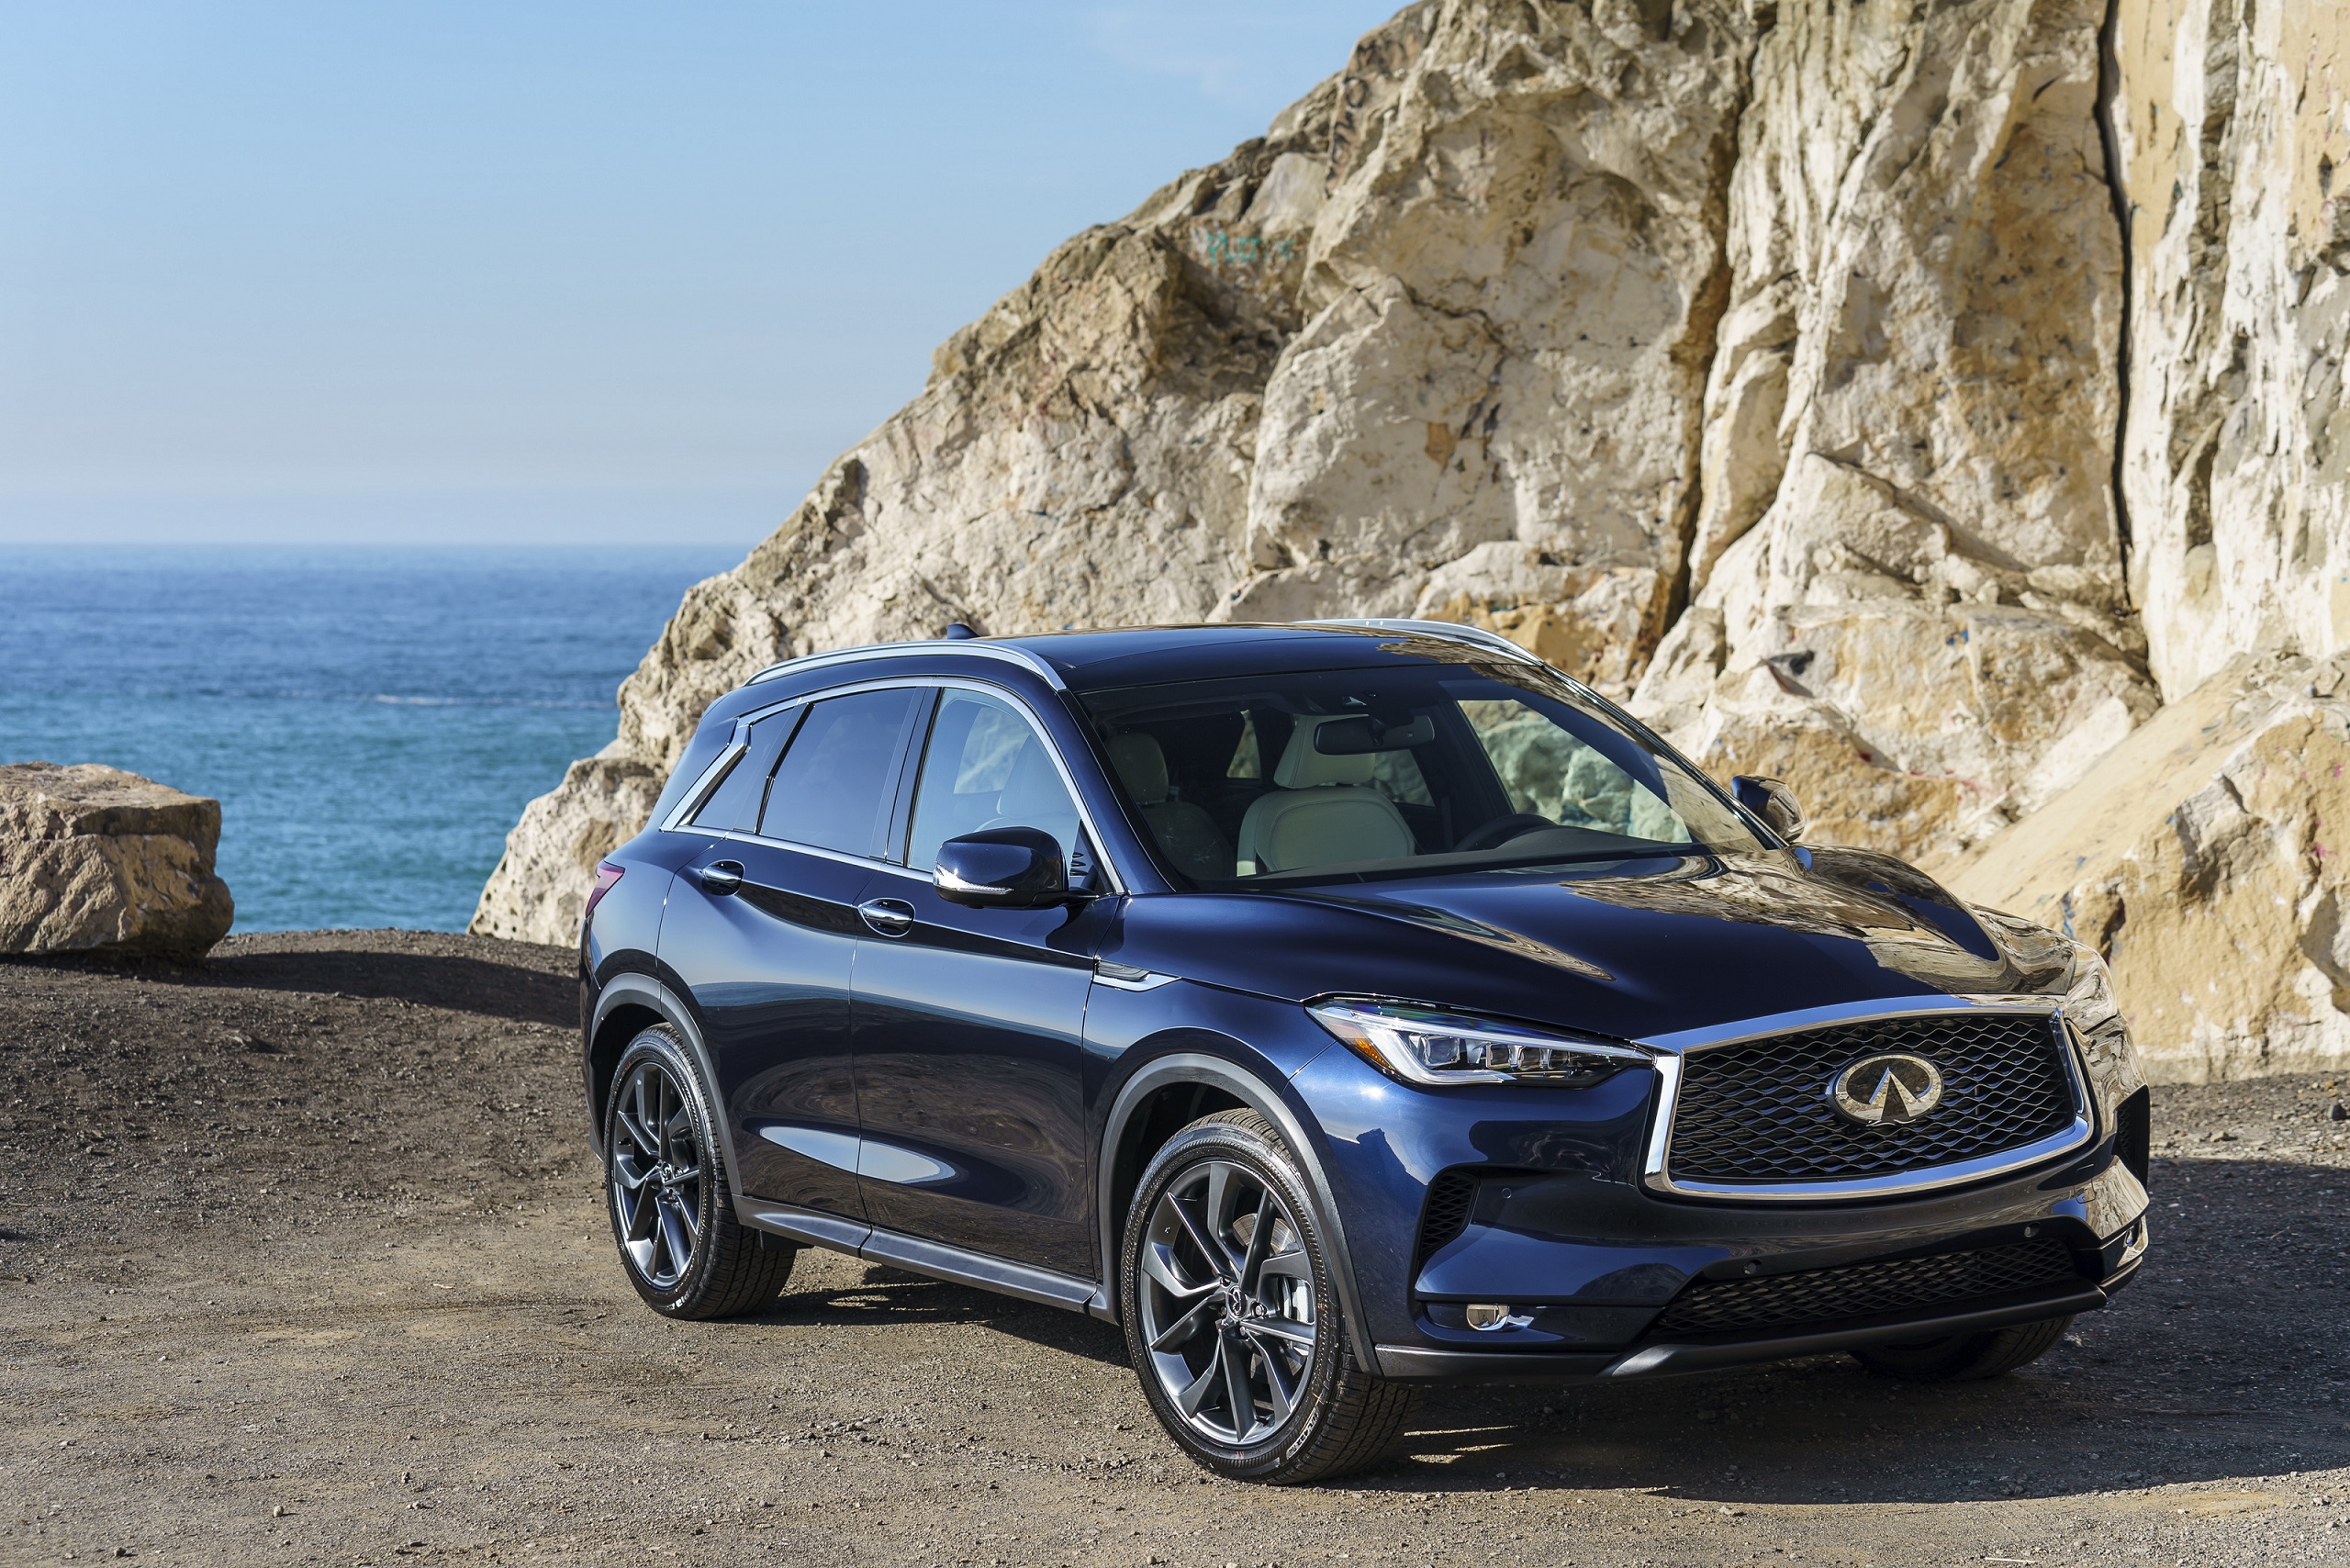 New Infiniti QX50 Arrives in the Middle East